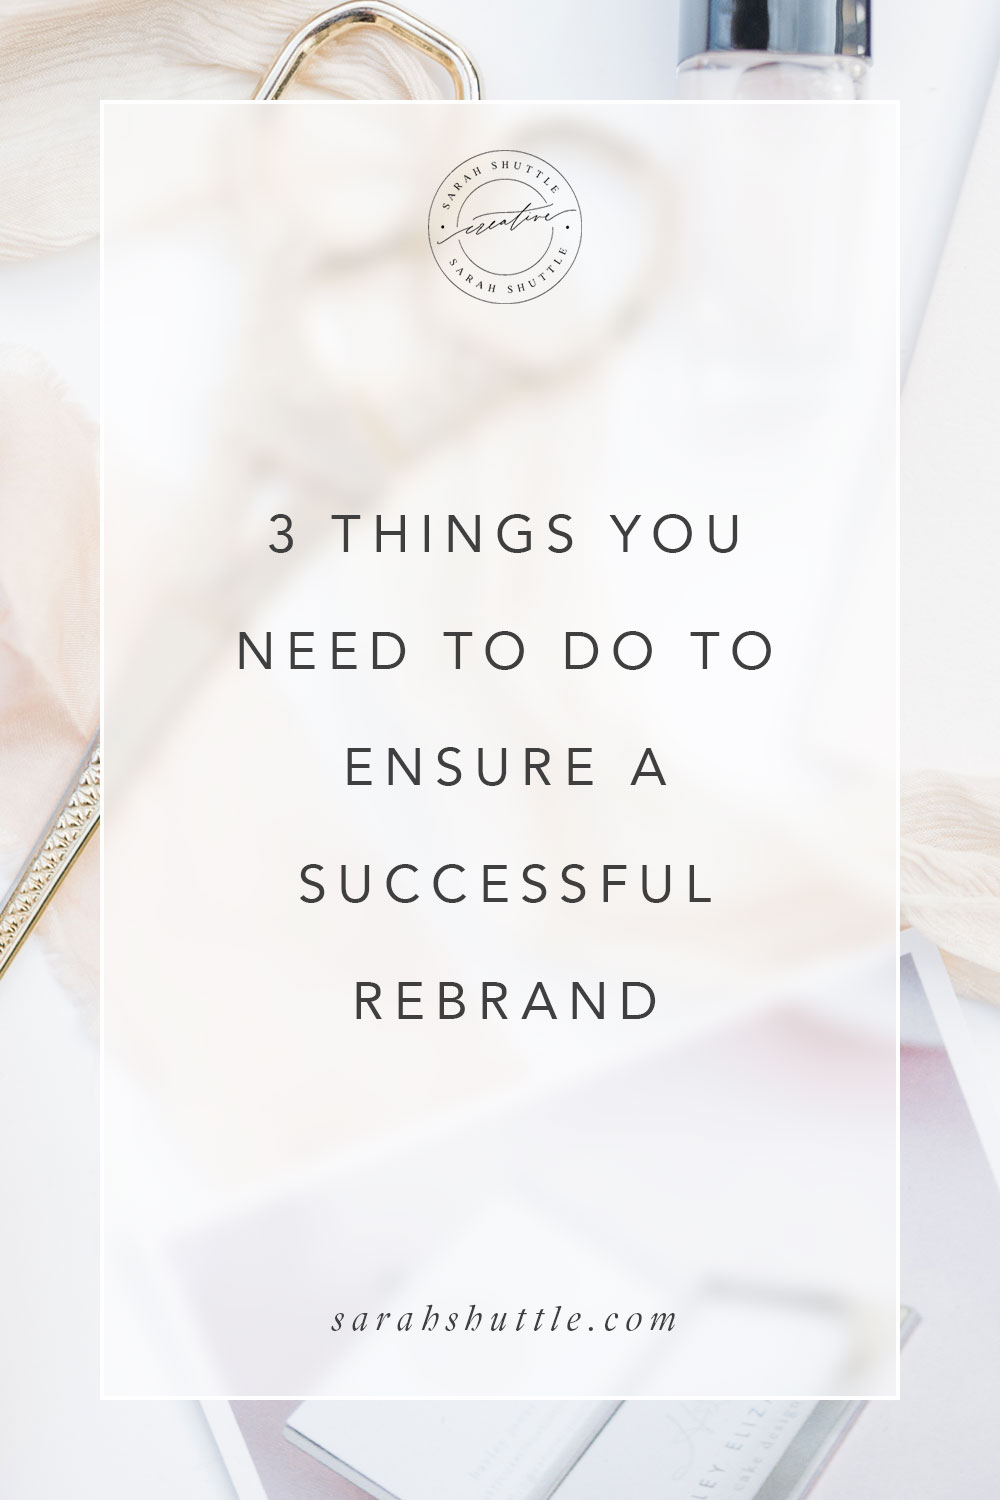 Tips for rebranding your wedding business | how to achieve a luxury rebrand | discover 3 things to do to rebrand your wedding business | luxury brand design business | wedding business branding | feminine branding inspiration | feminine website design business | wedding planner business website | branding advice |